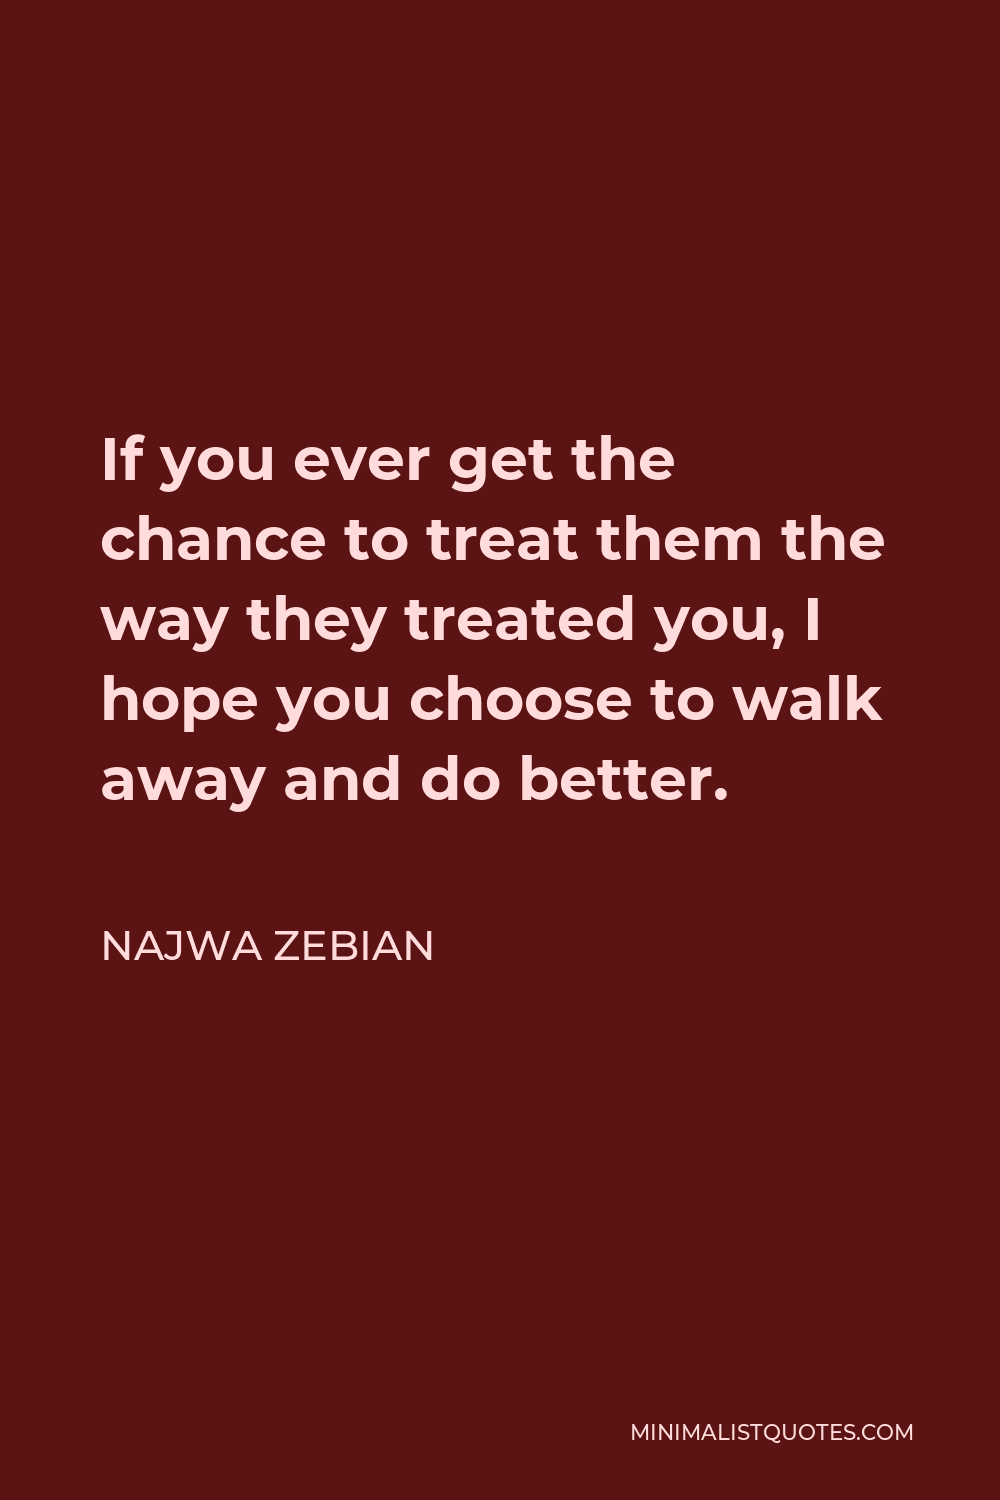 Najwa Zebian Quote - If you ever get the chance to treat them the way they treated you, I hope you choose to walk away and do better.